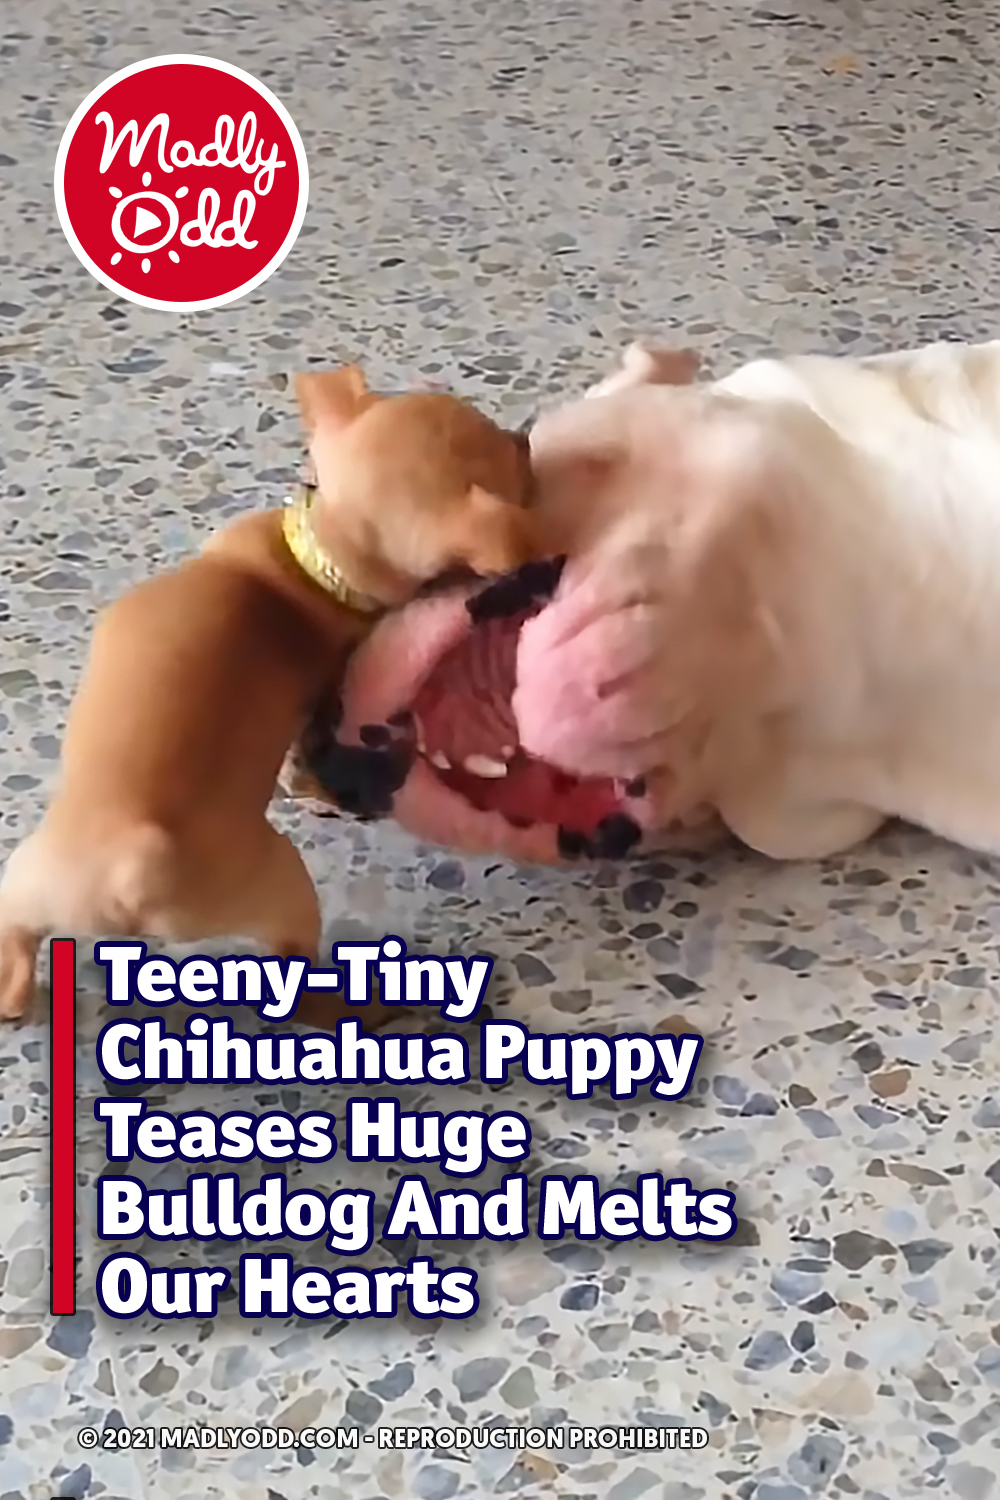 Teeny-Tiny Chihuahua Puppy Teases Huge Bulldog And Melts Our Hearts